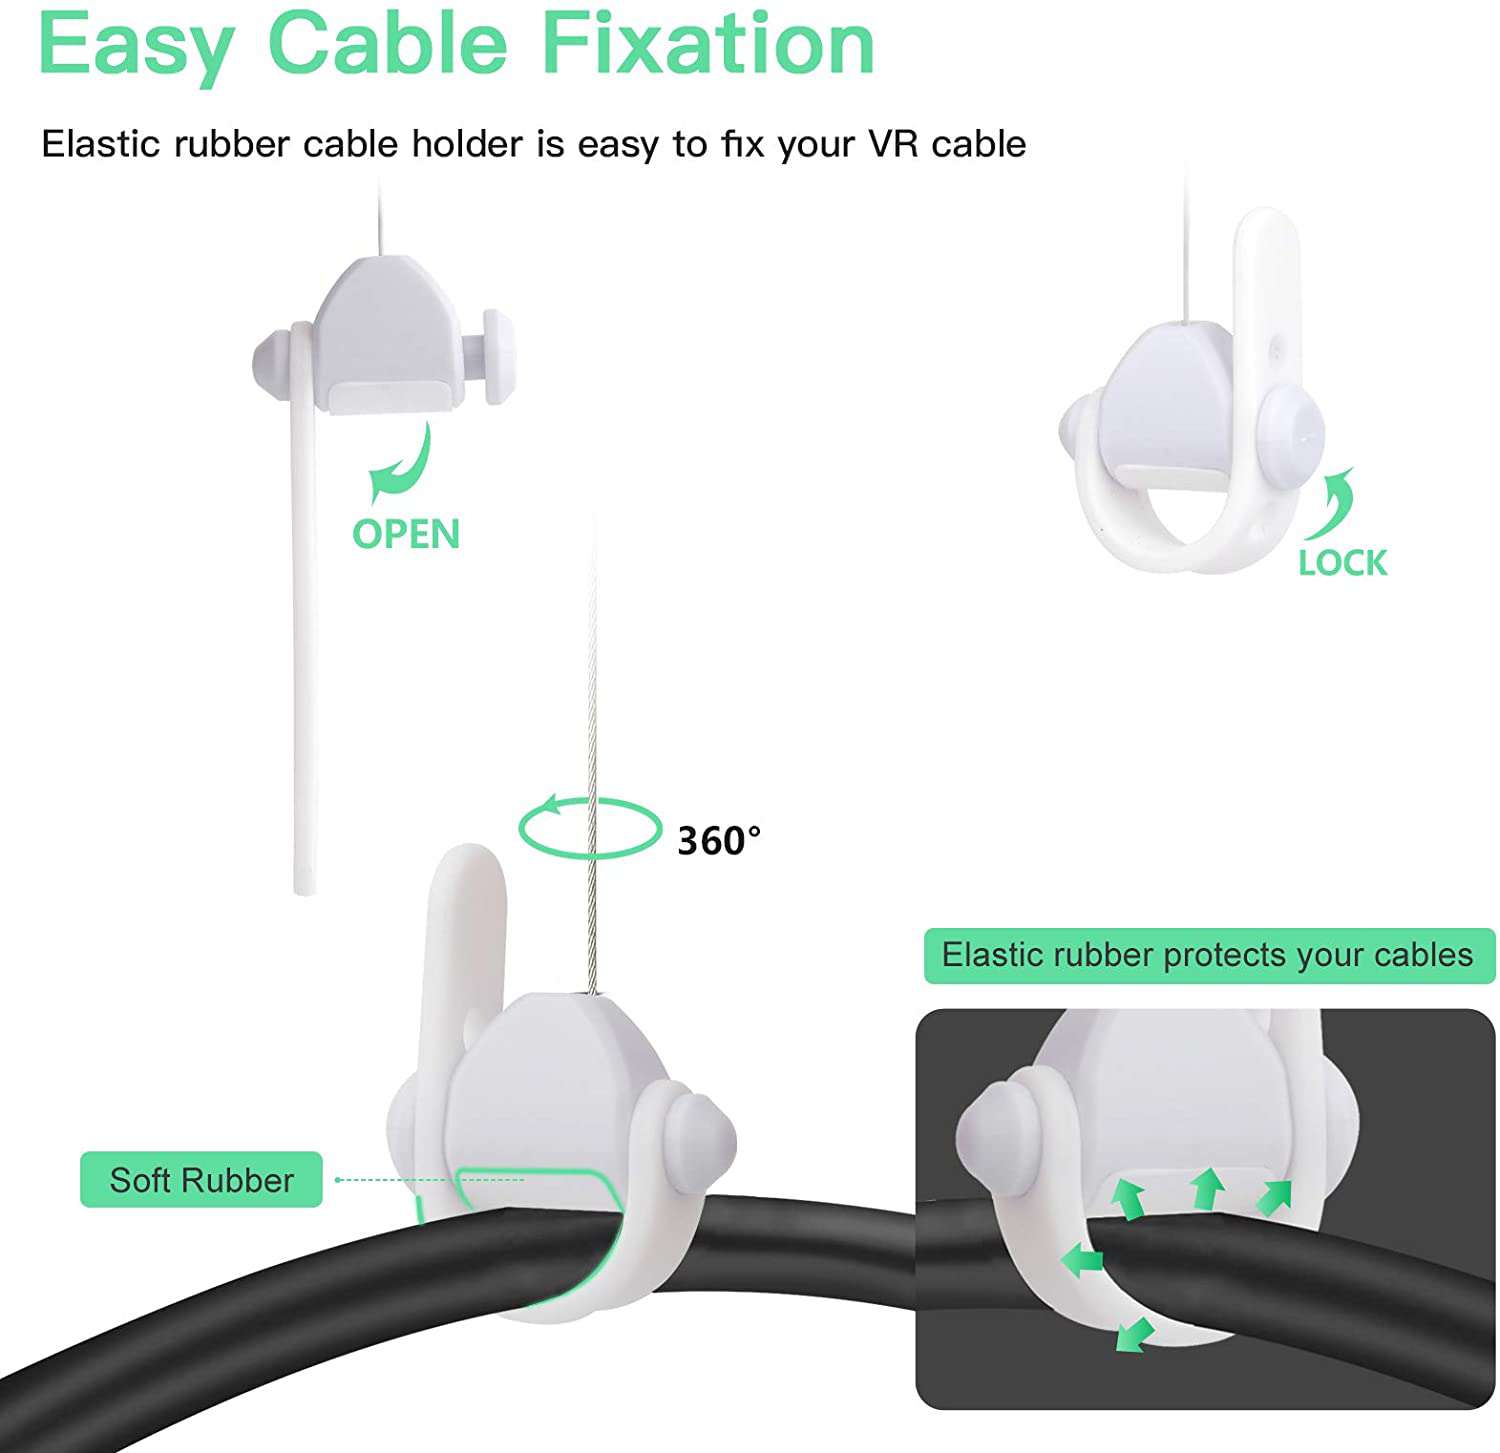 Rubber Cable Holder can fix VR cable and has elastic rubber to prevent wearing on your VR cable